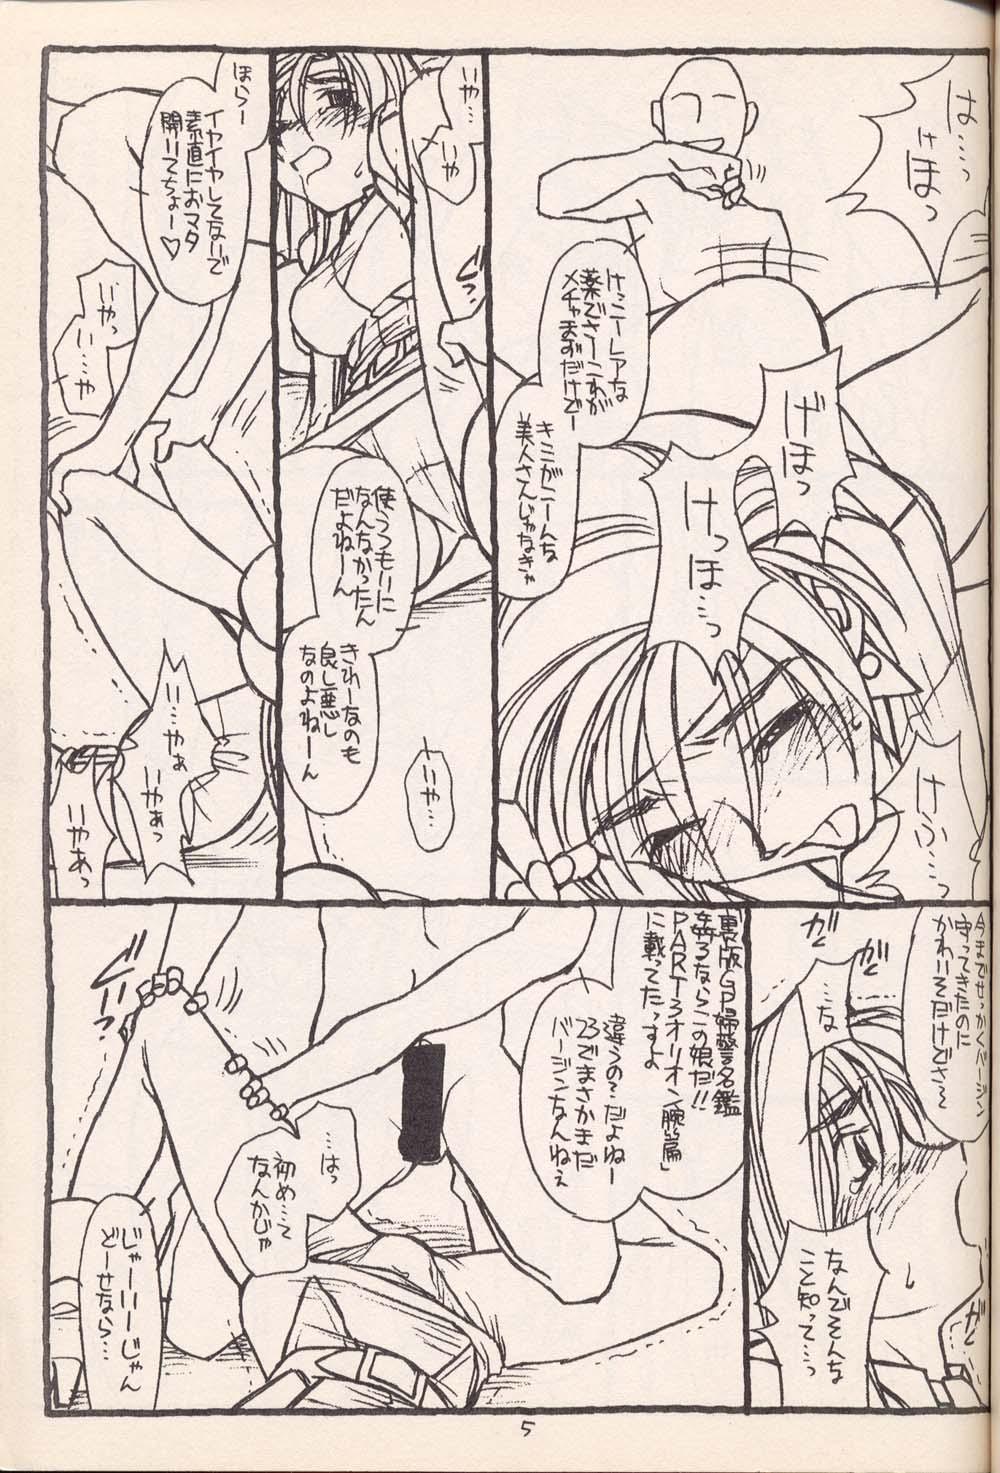 Lesbos Return of the Scavenger - Tenchi muyo For - Page 4